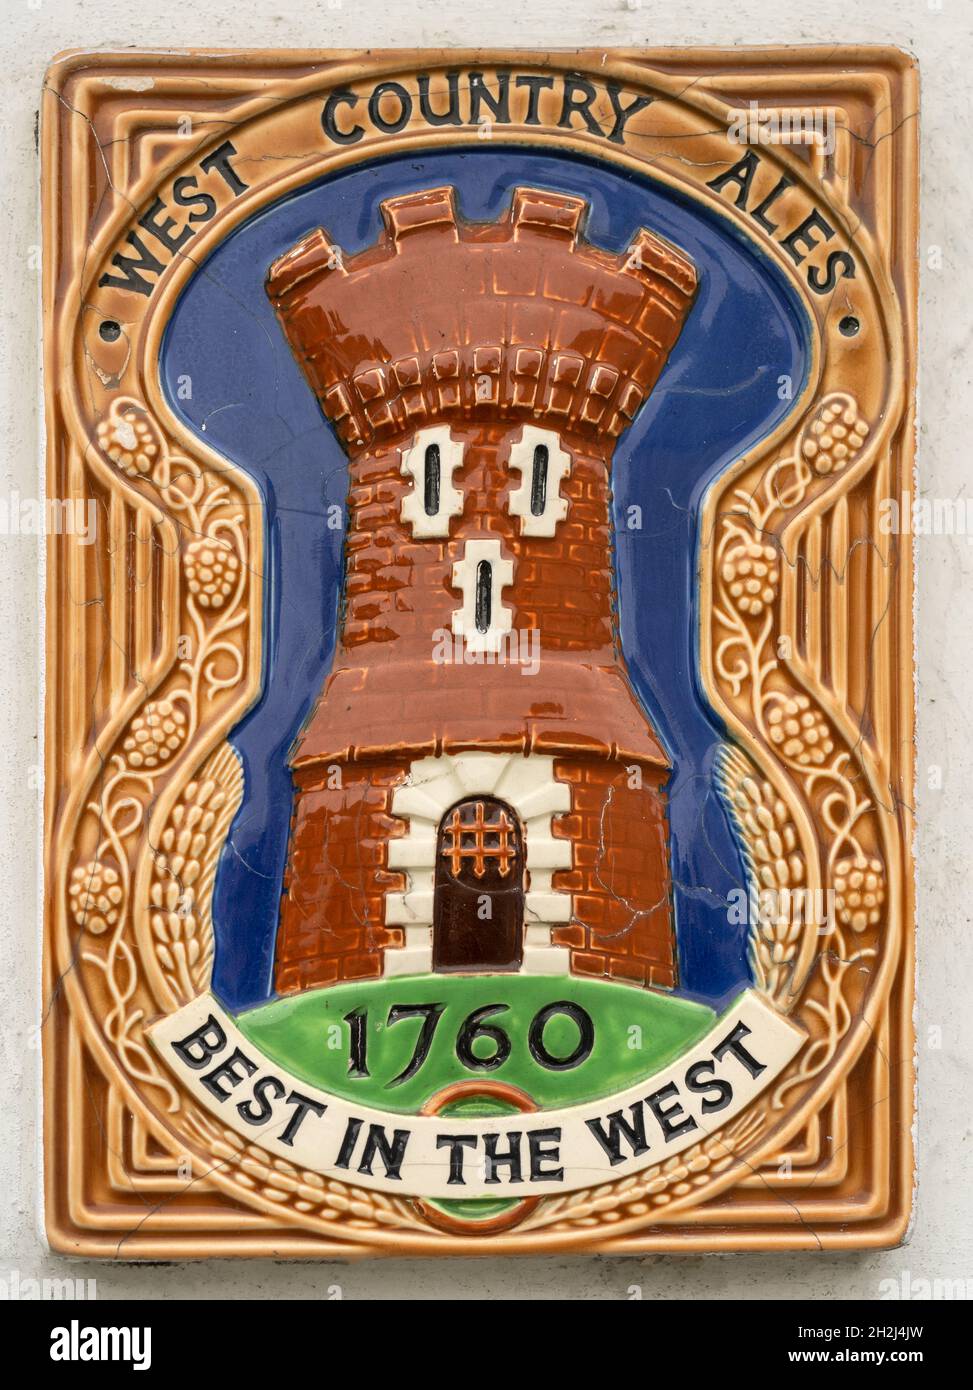 West Country Ales ceramic sign. These brewery signs can still seen around Gloucestershire echoes of a proud brewing heritage. United Kingdom Stock Photo